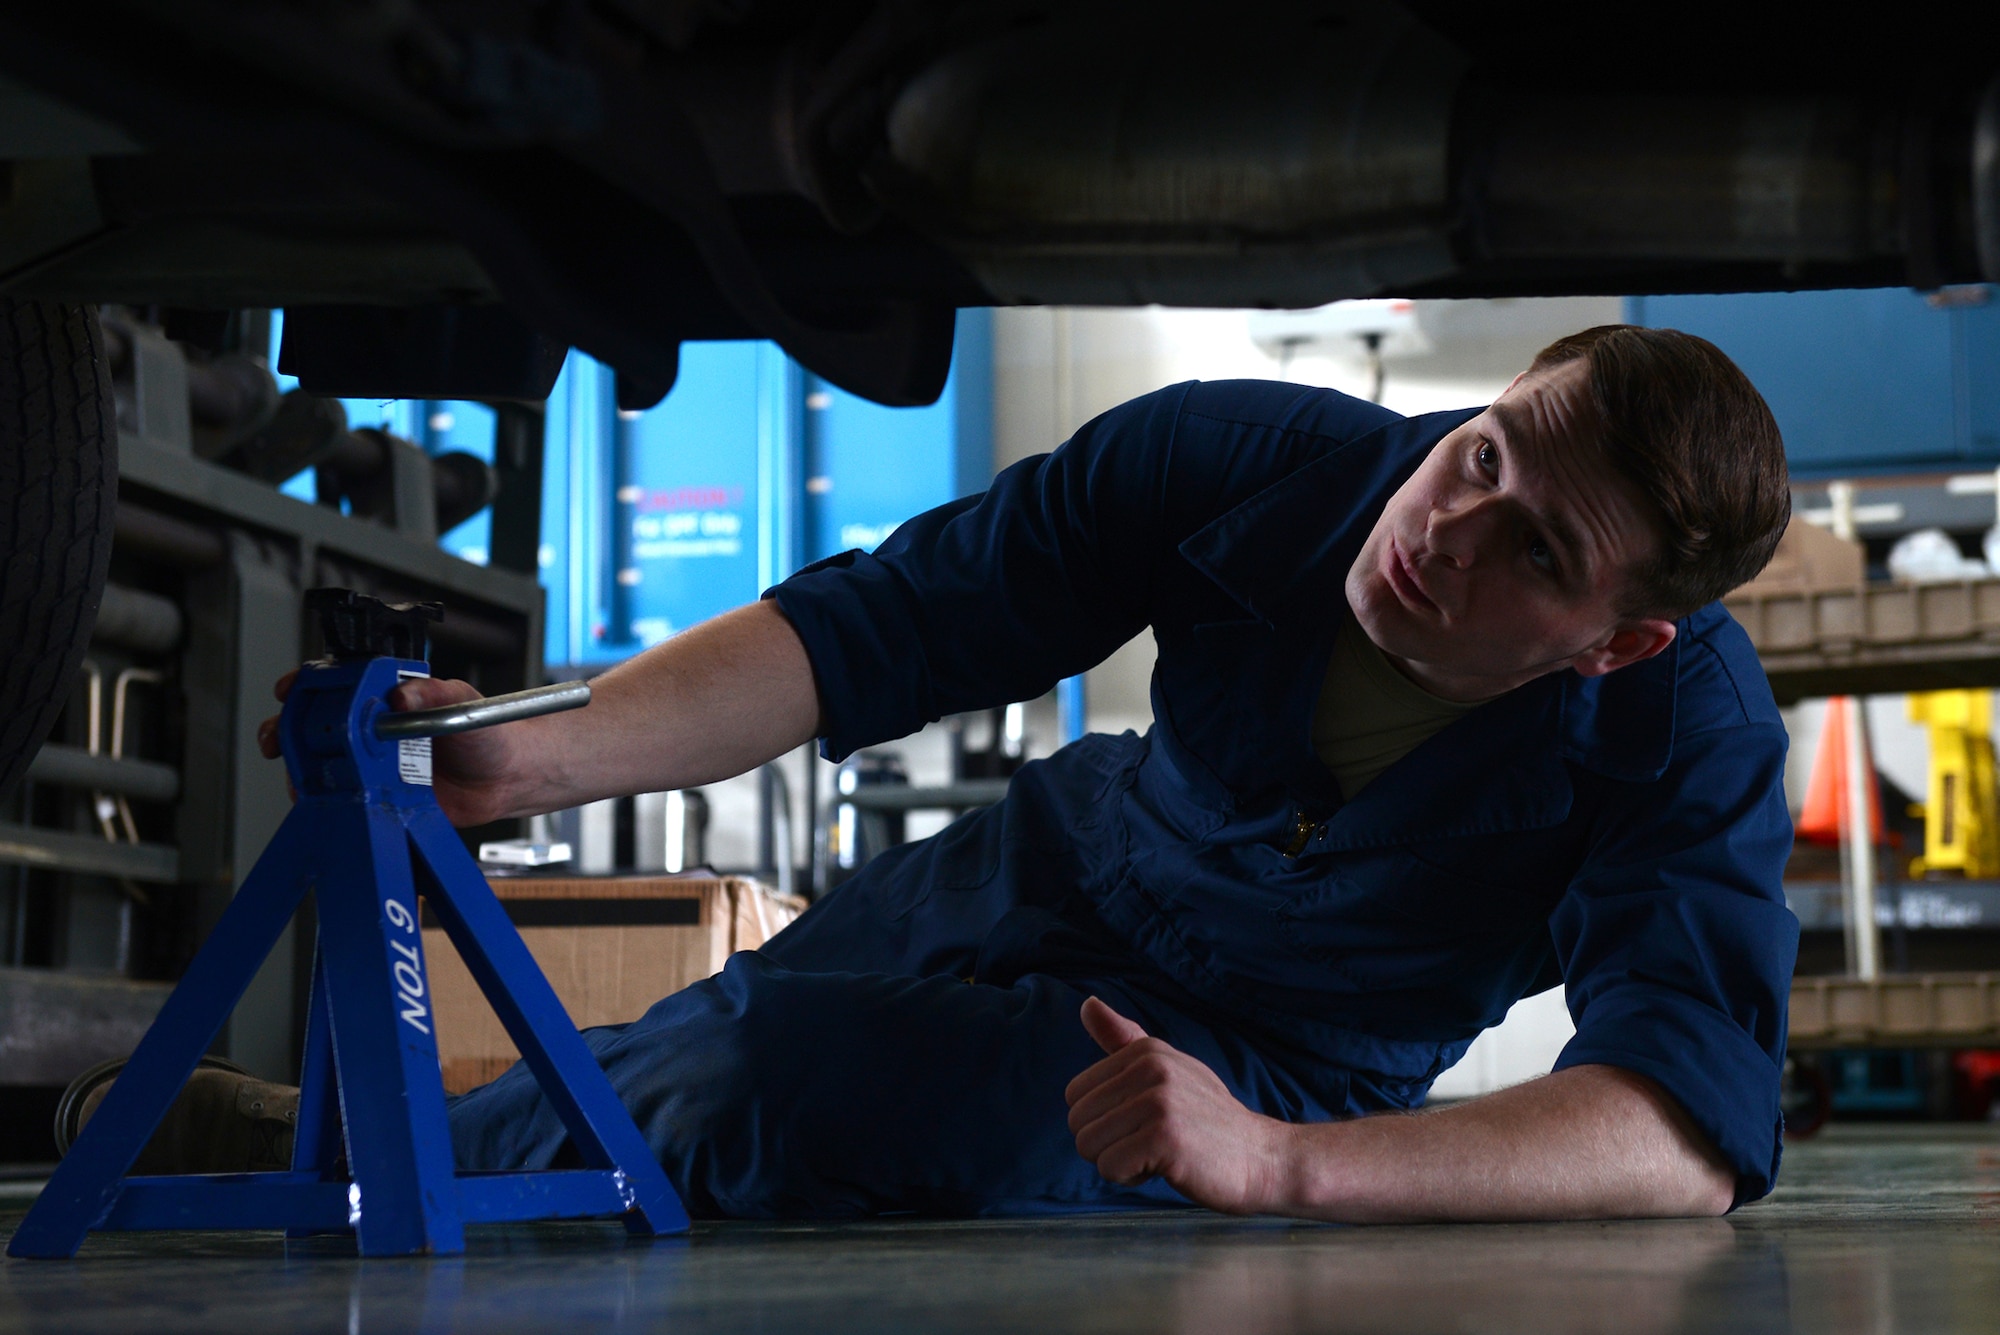 Senior Airman Brandon Higginbotham, a 374th Logistics Readiness Squadron vehicle maintenance journeyman, places jack stands under a government vehicle at Yokota Air Base, Japan, April 28, 2015. Stands are placed to ensure the safety of the mechanics working on vehicles. (U.S. Air Force photo/Airman 1st Class David C. Danford)